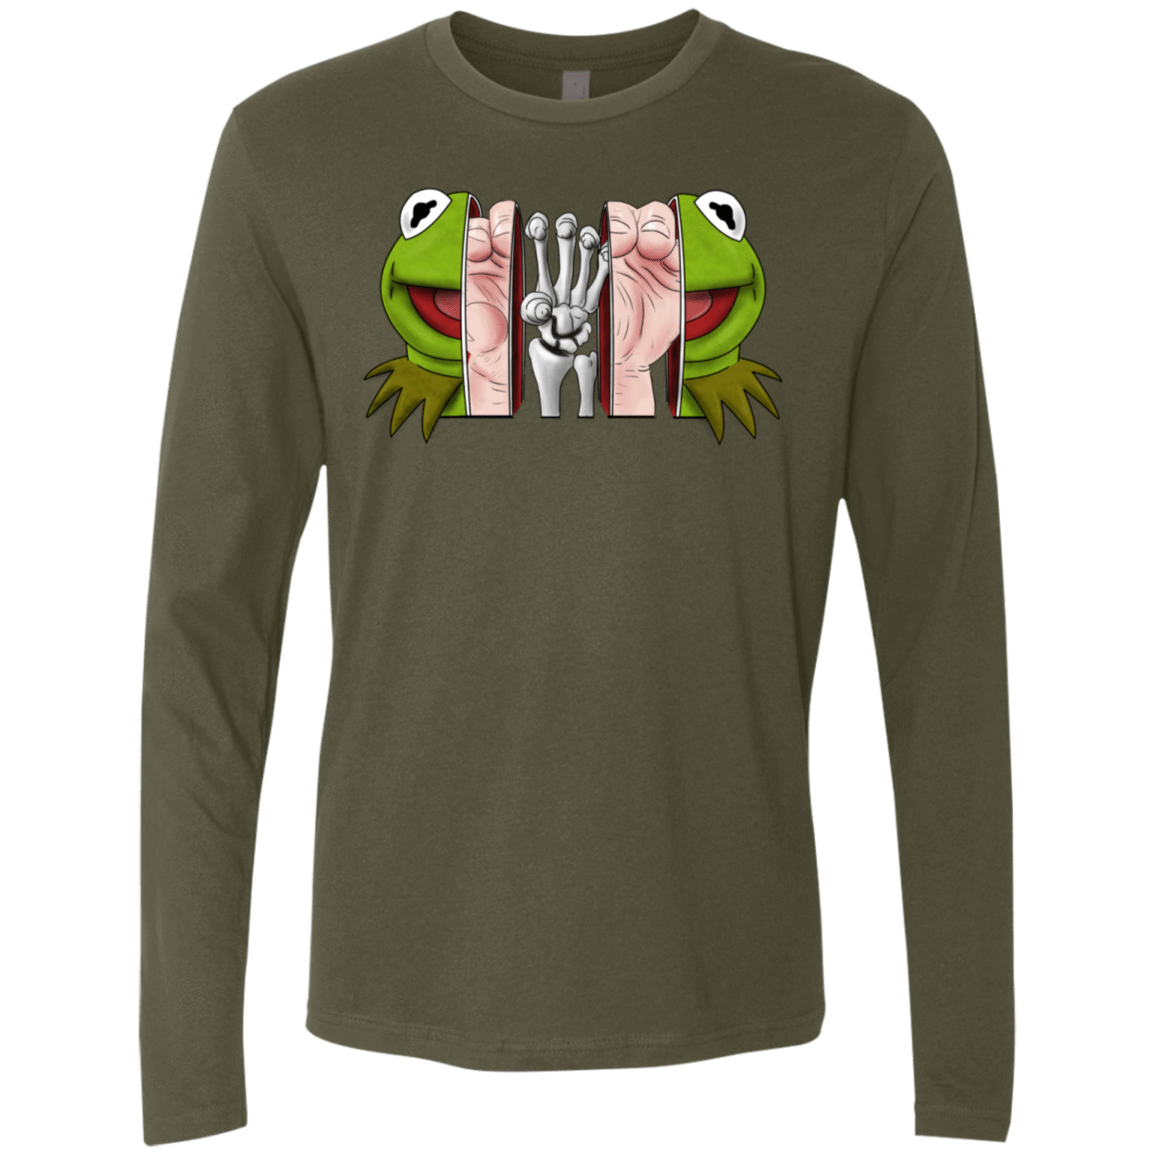 T-Shirts Military Green / S Inside the Frog Men's Premium Long Sleeve